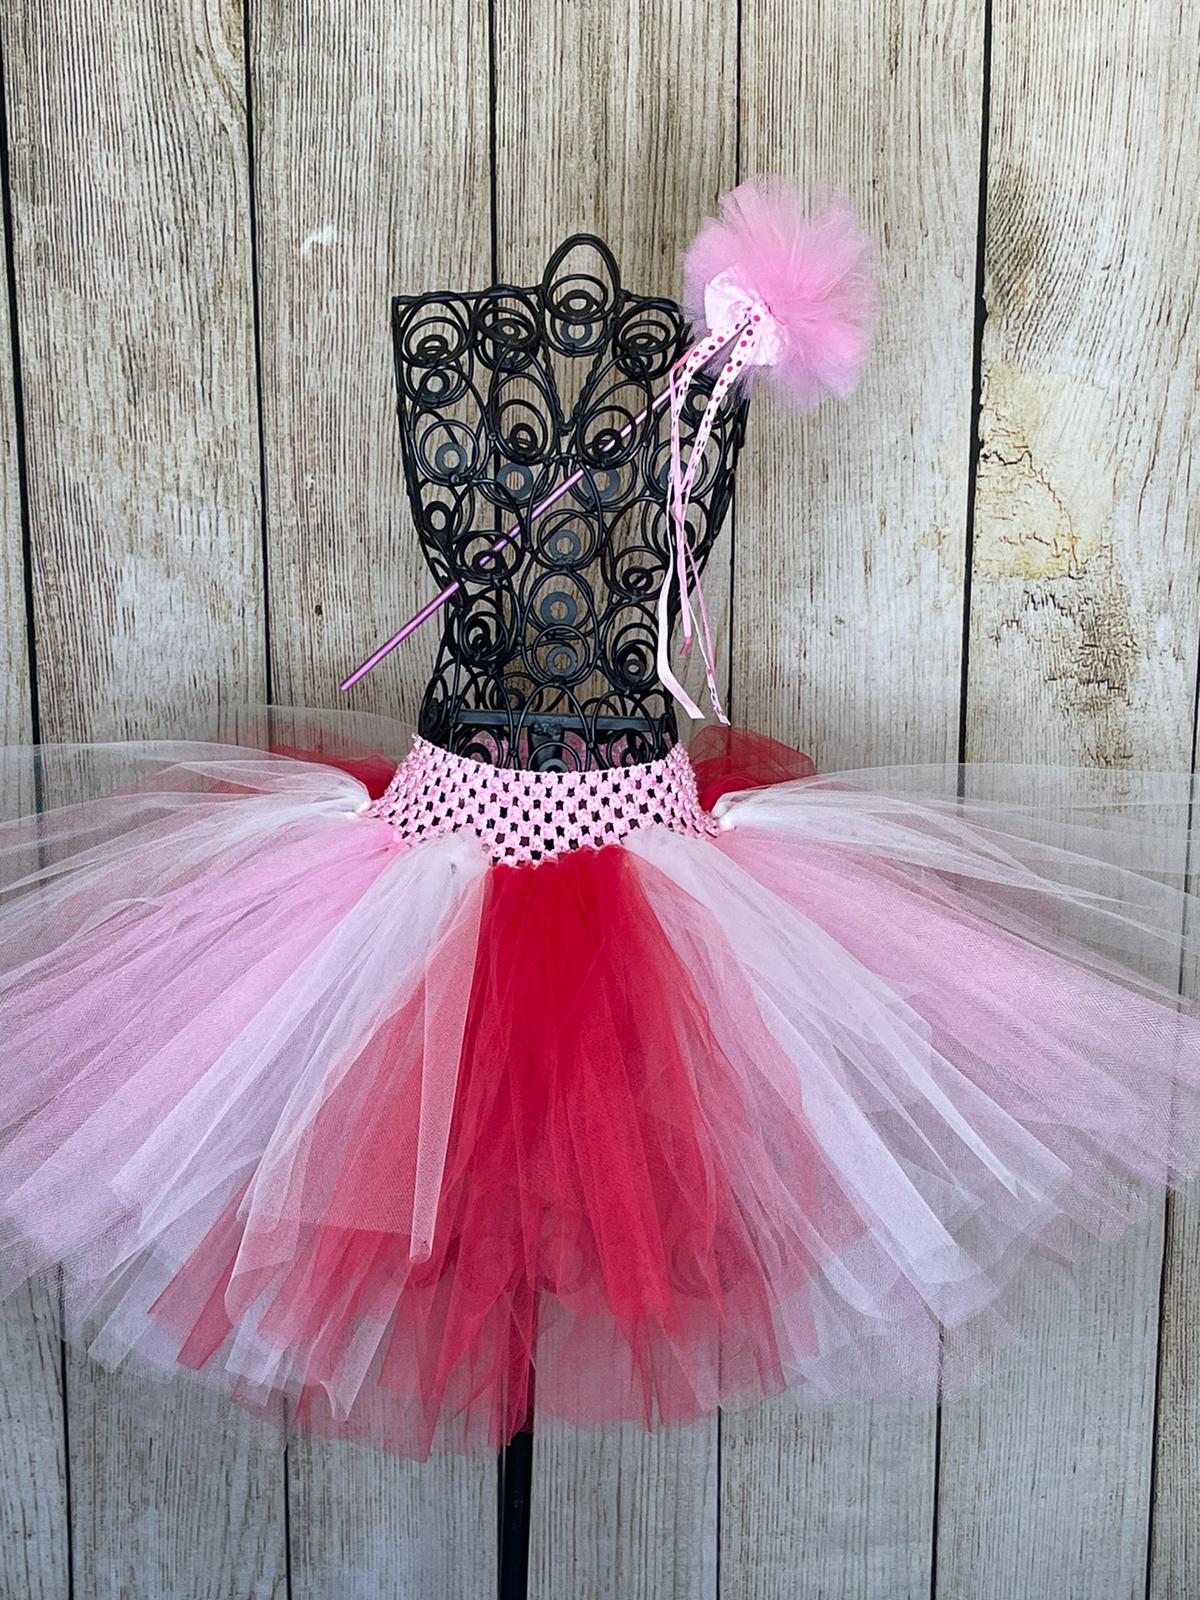 Festive Valentines Red White and Pink Tutu and Magical Wand